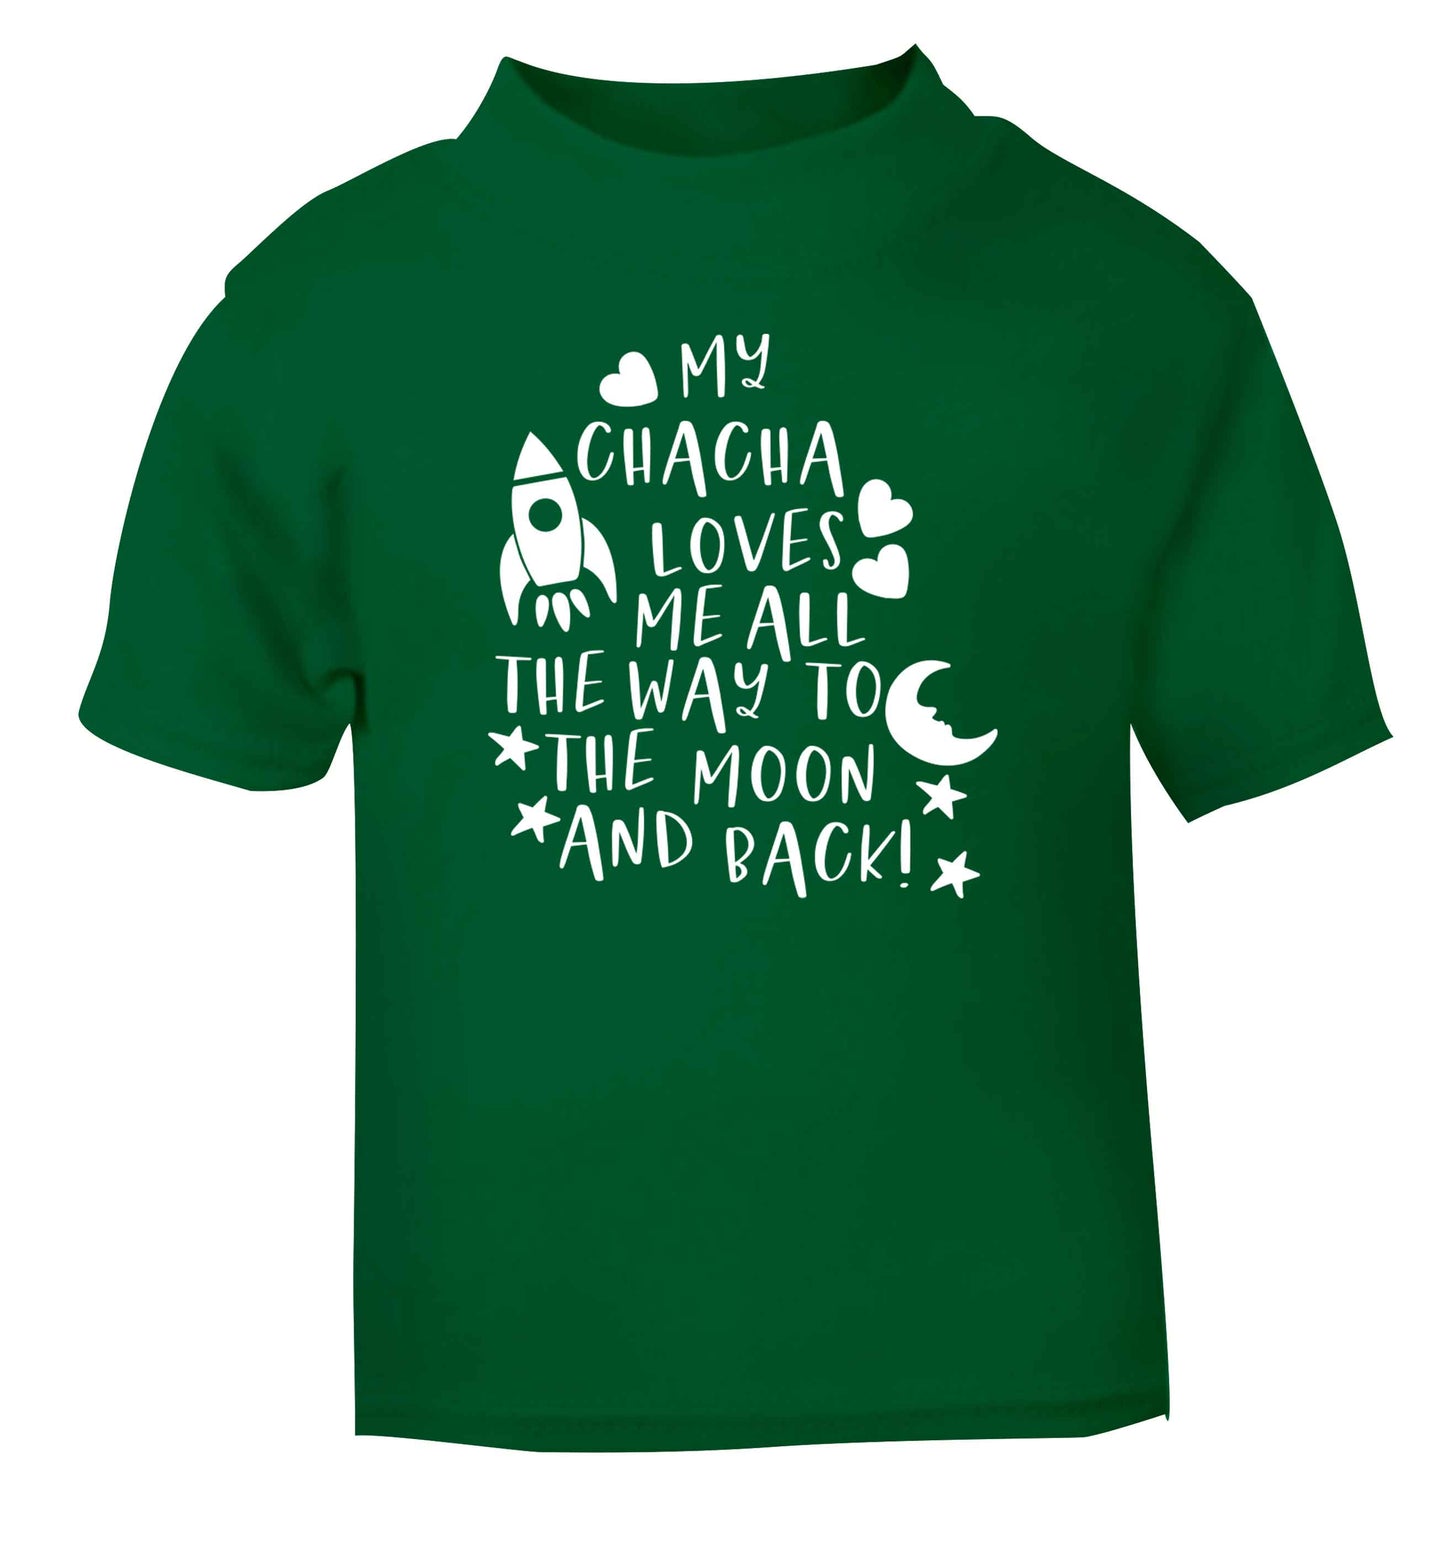 My chacha loves me all the way to the moon and back green Baby Toddler Tshirt 2 Years